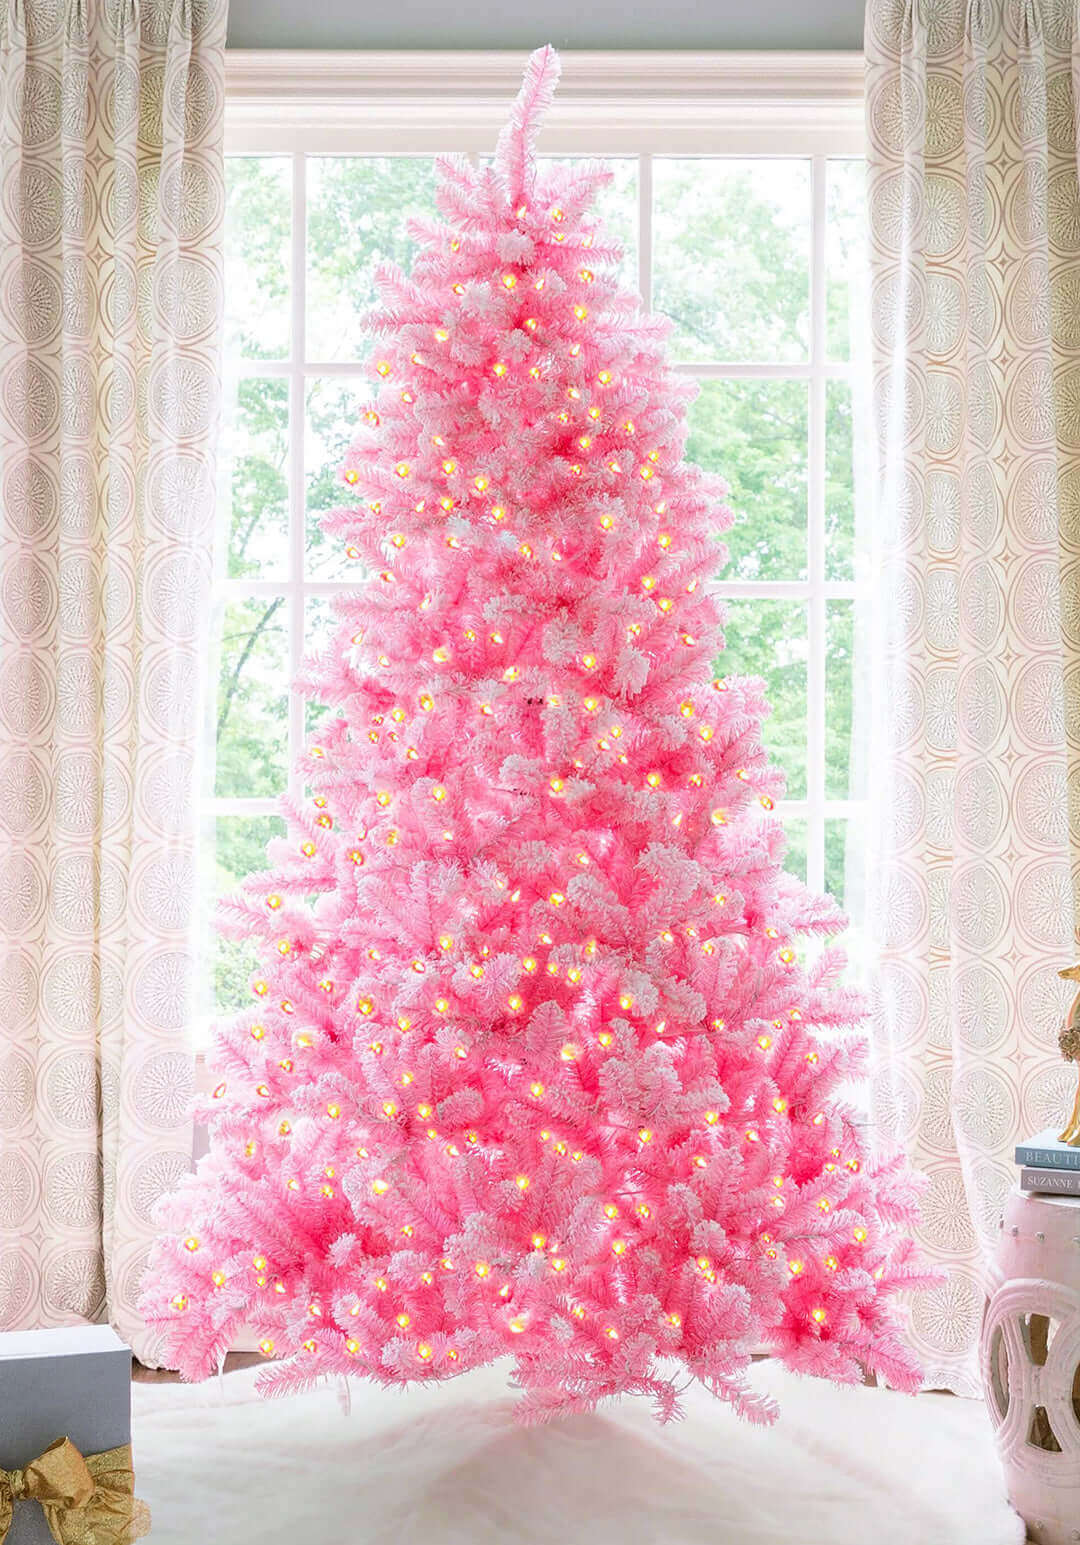 Why Flocked Christmas Trees Remind Us of An Old-Fashioned Christmas